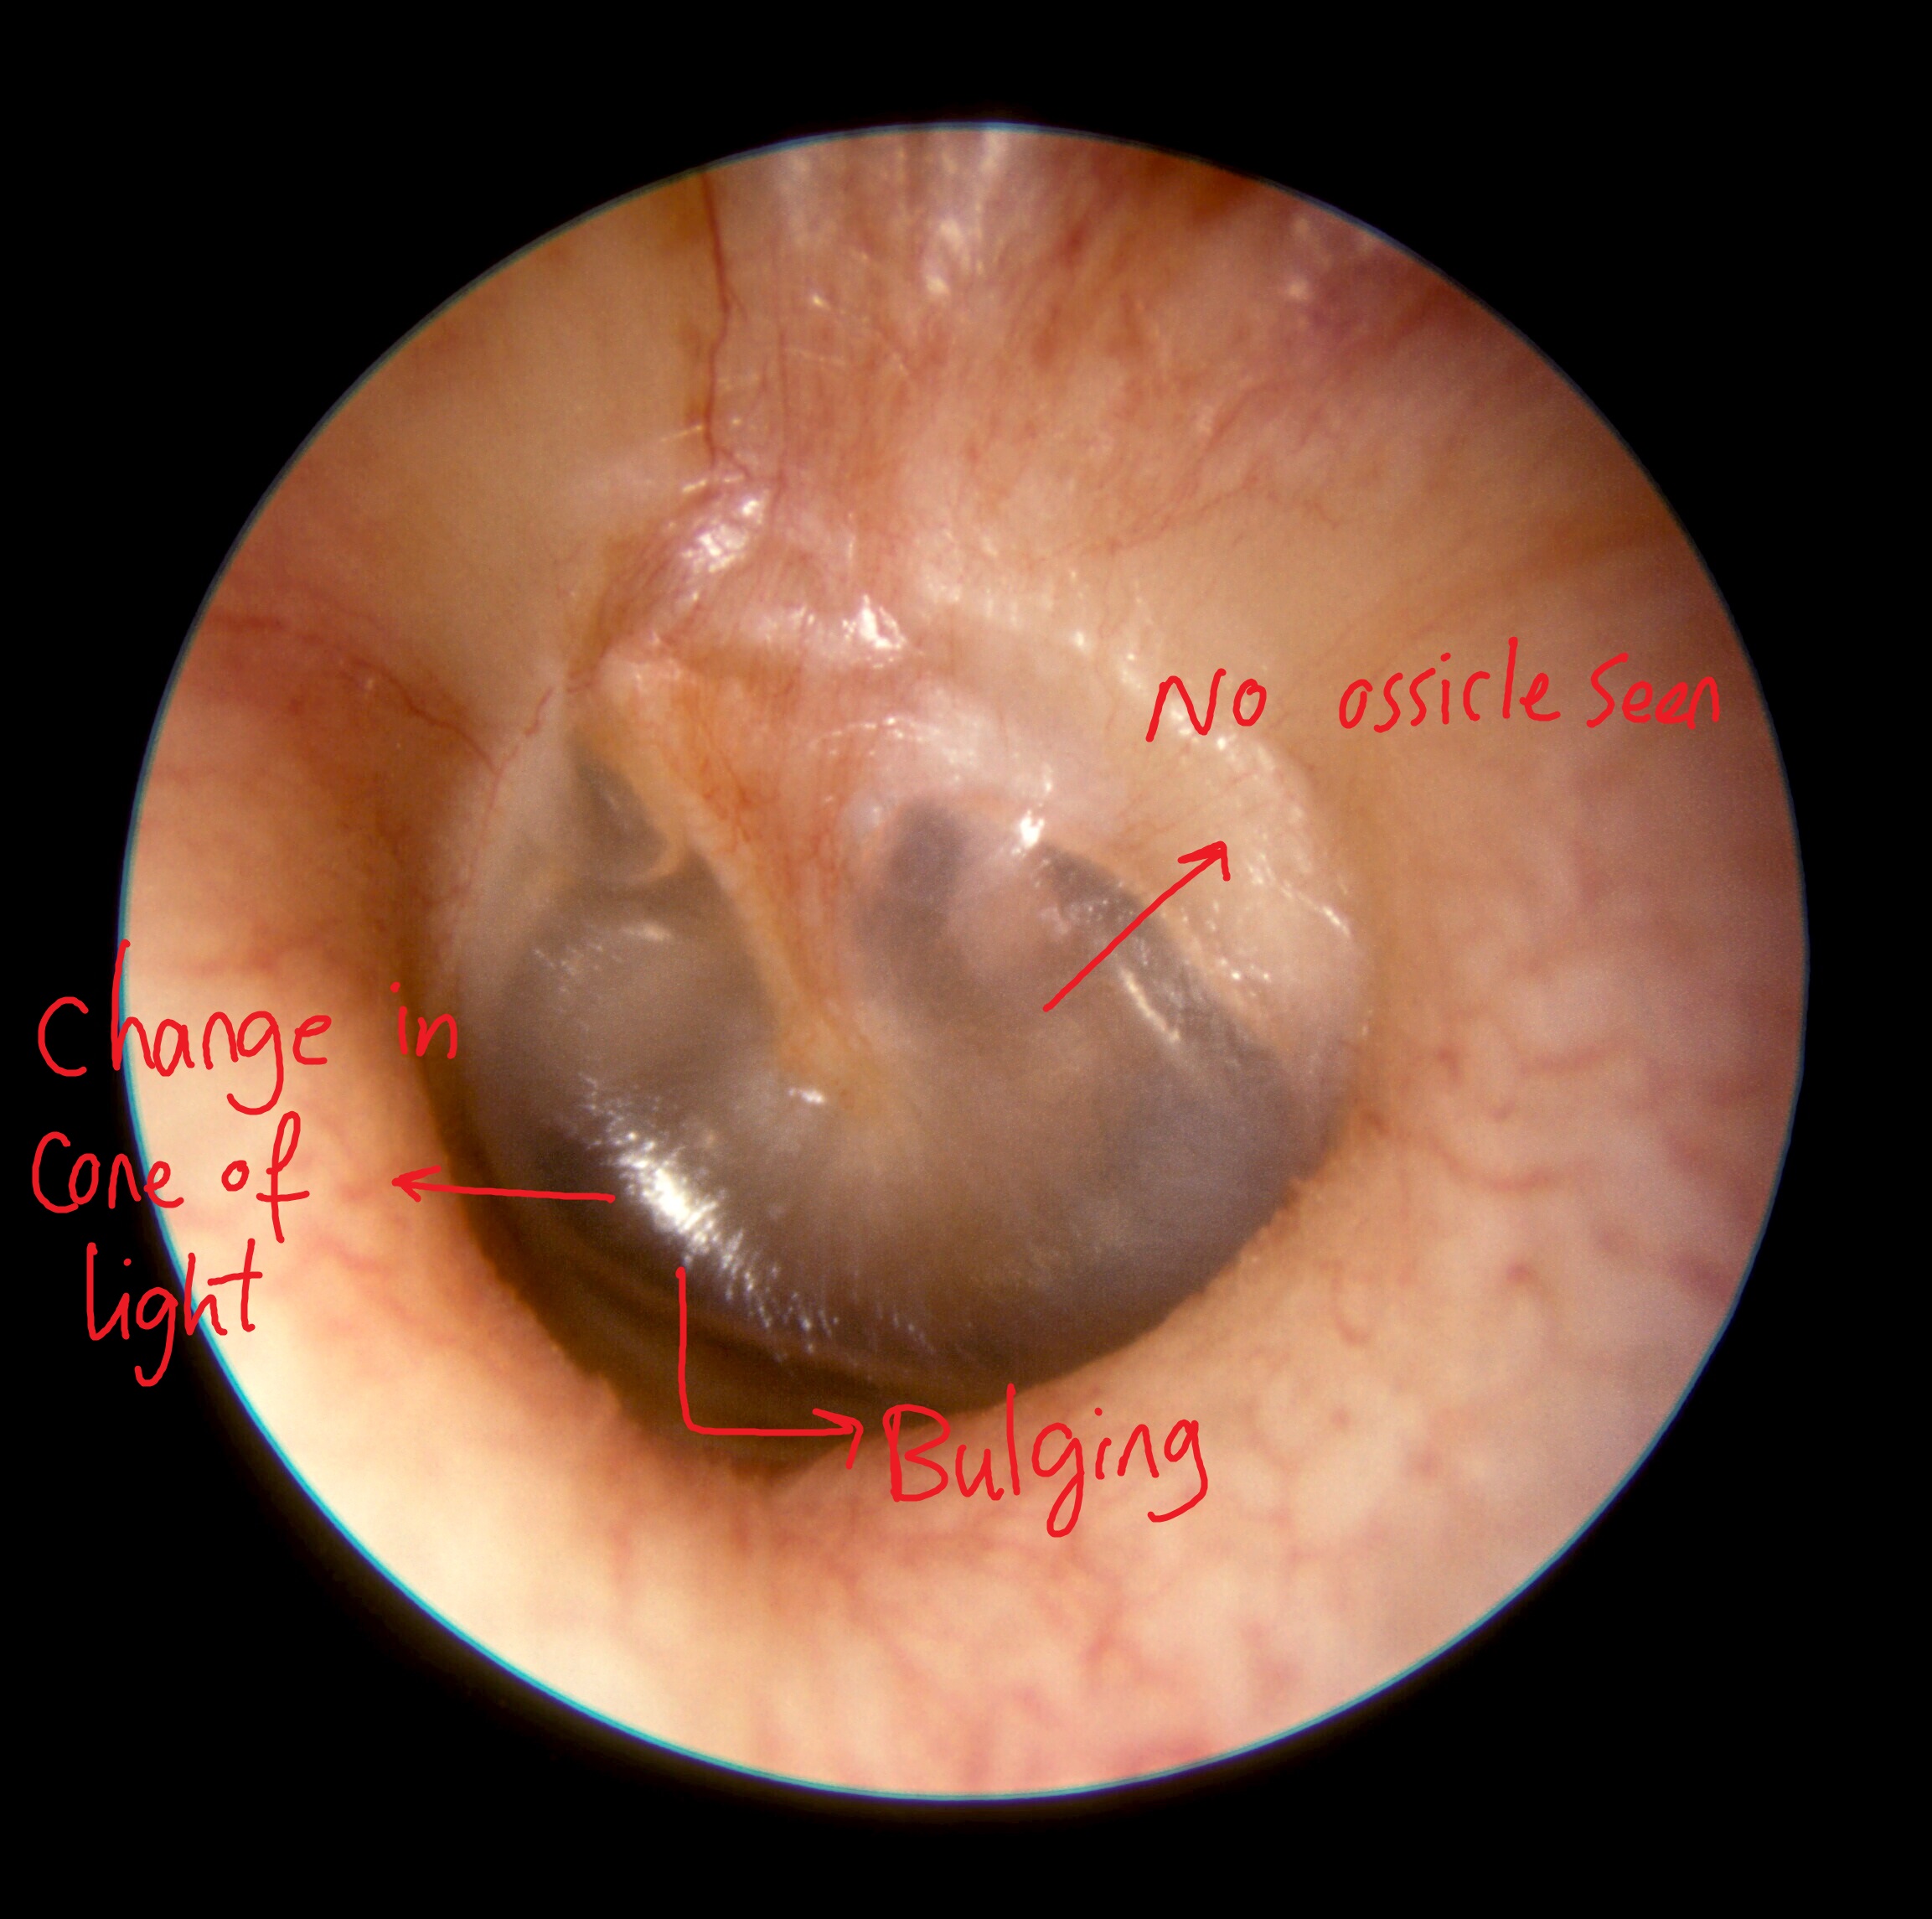 Middle ear effusion